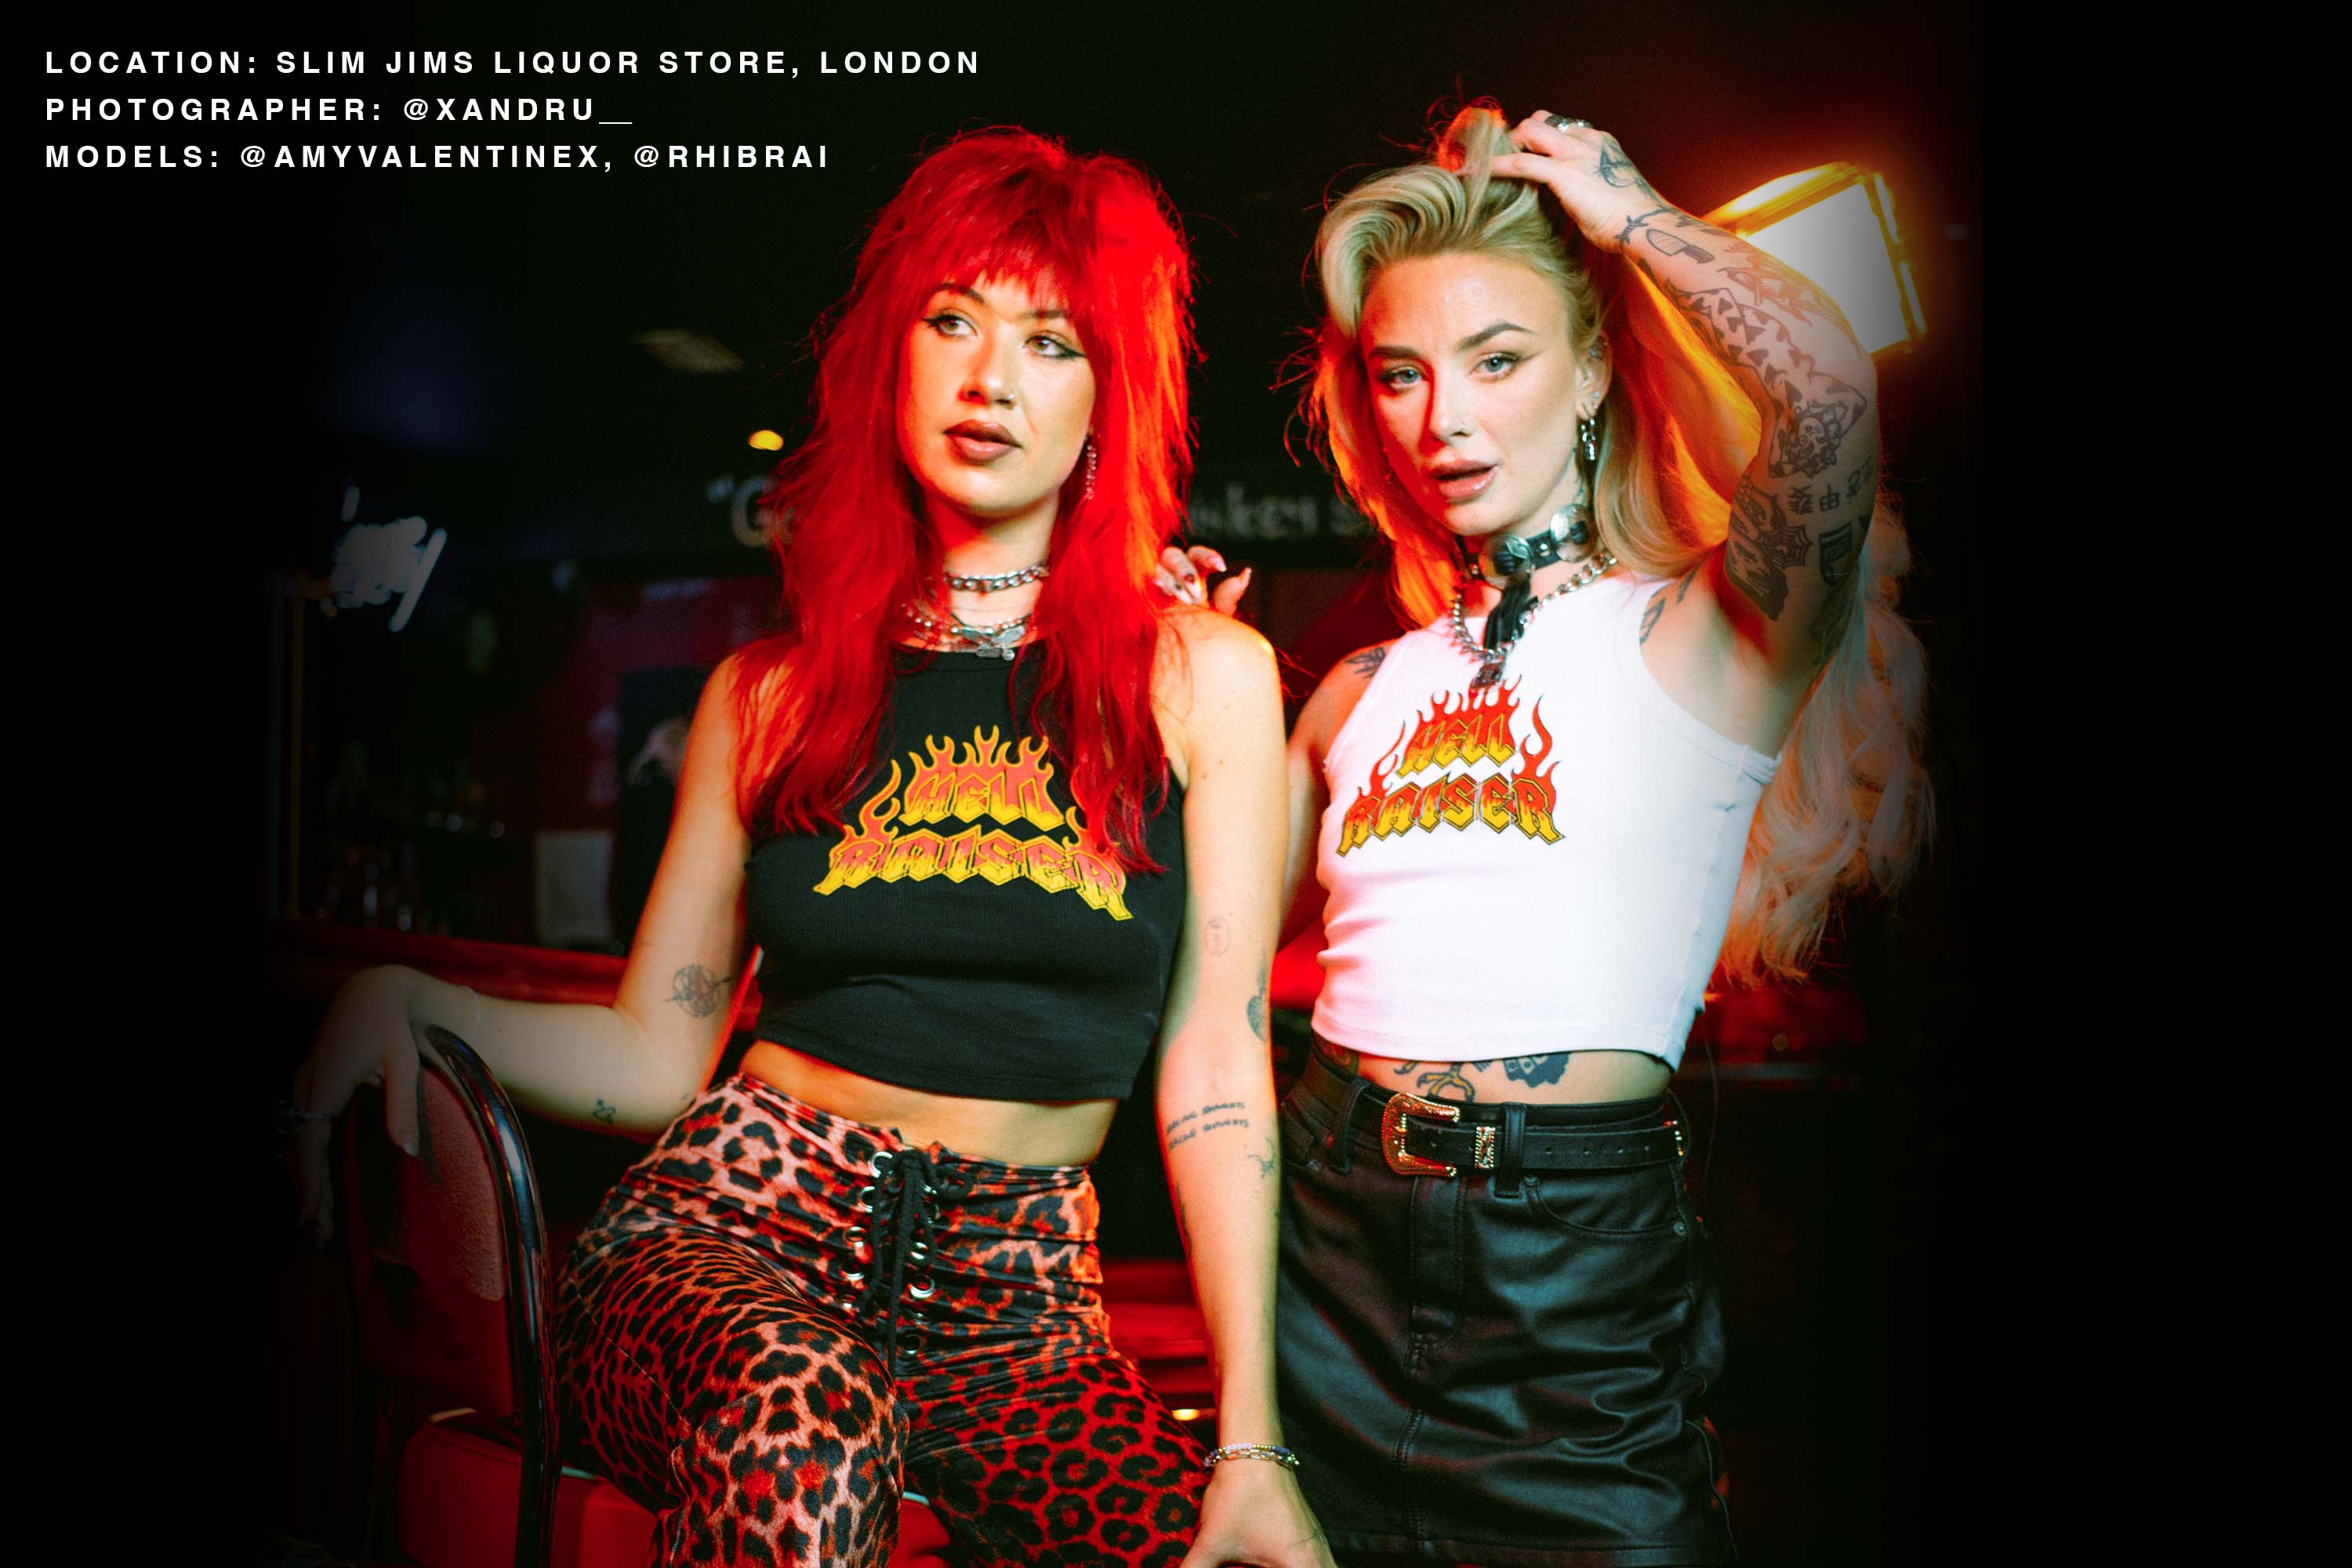 Amy Valentine and Rhianon Brailsford wearing Sleazy Rider in a dive bar, photography by Xandru